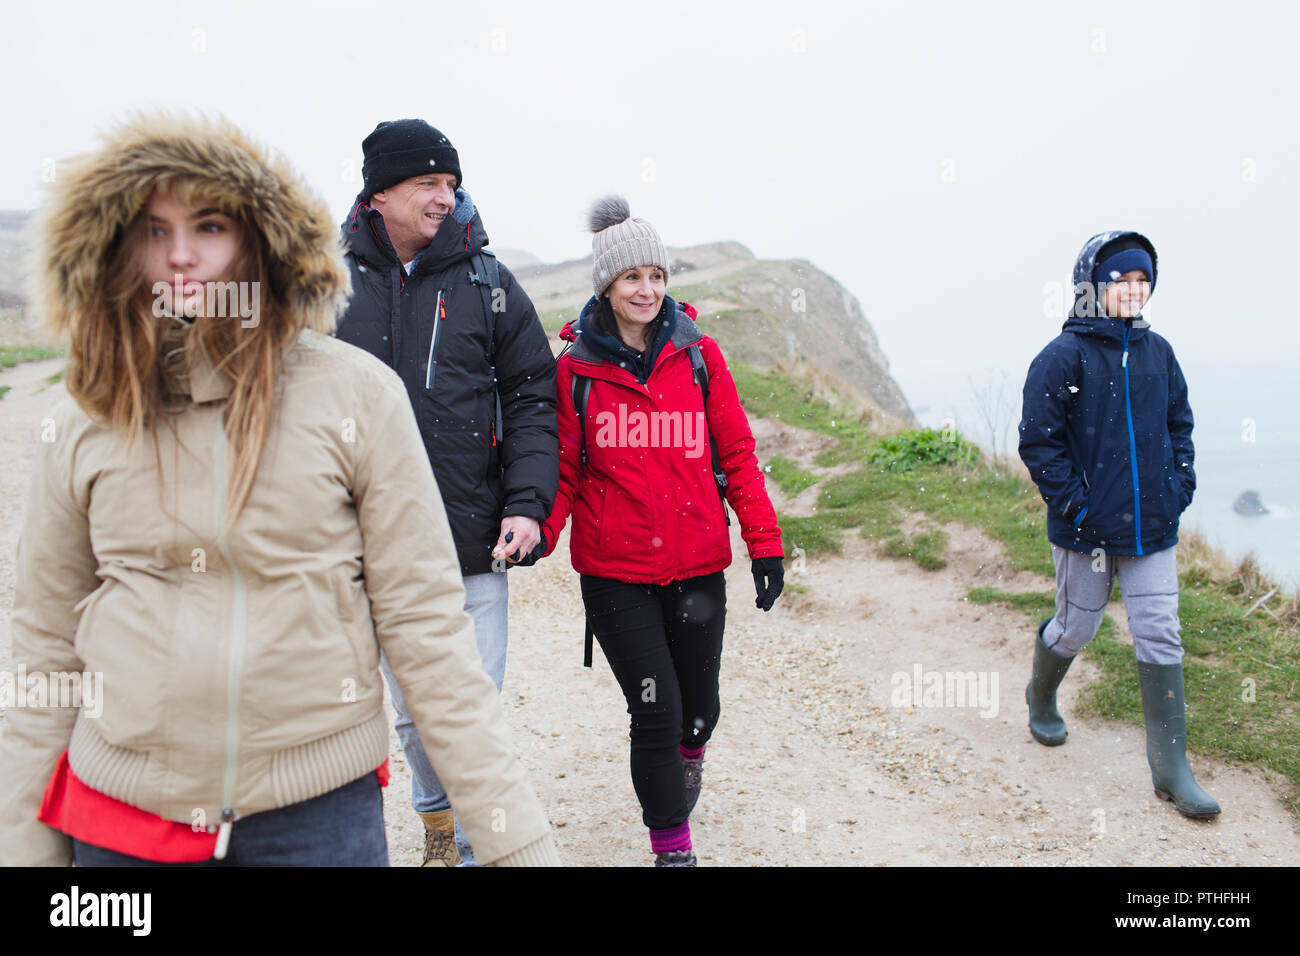 Family in warm clothing walking on snowy winter cliff path Stock Photo